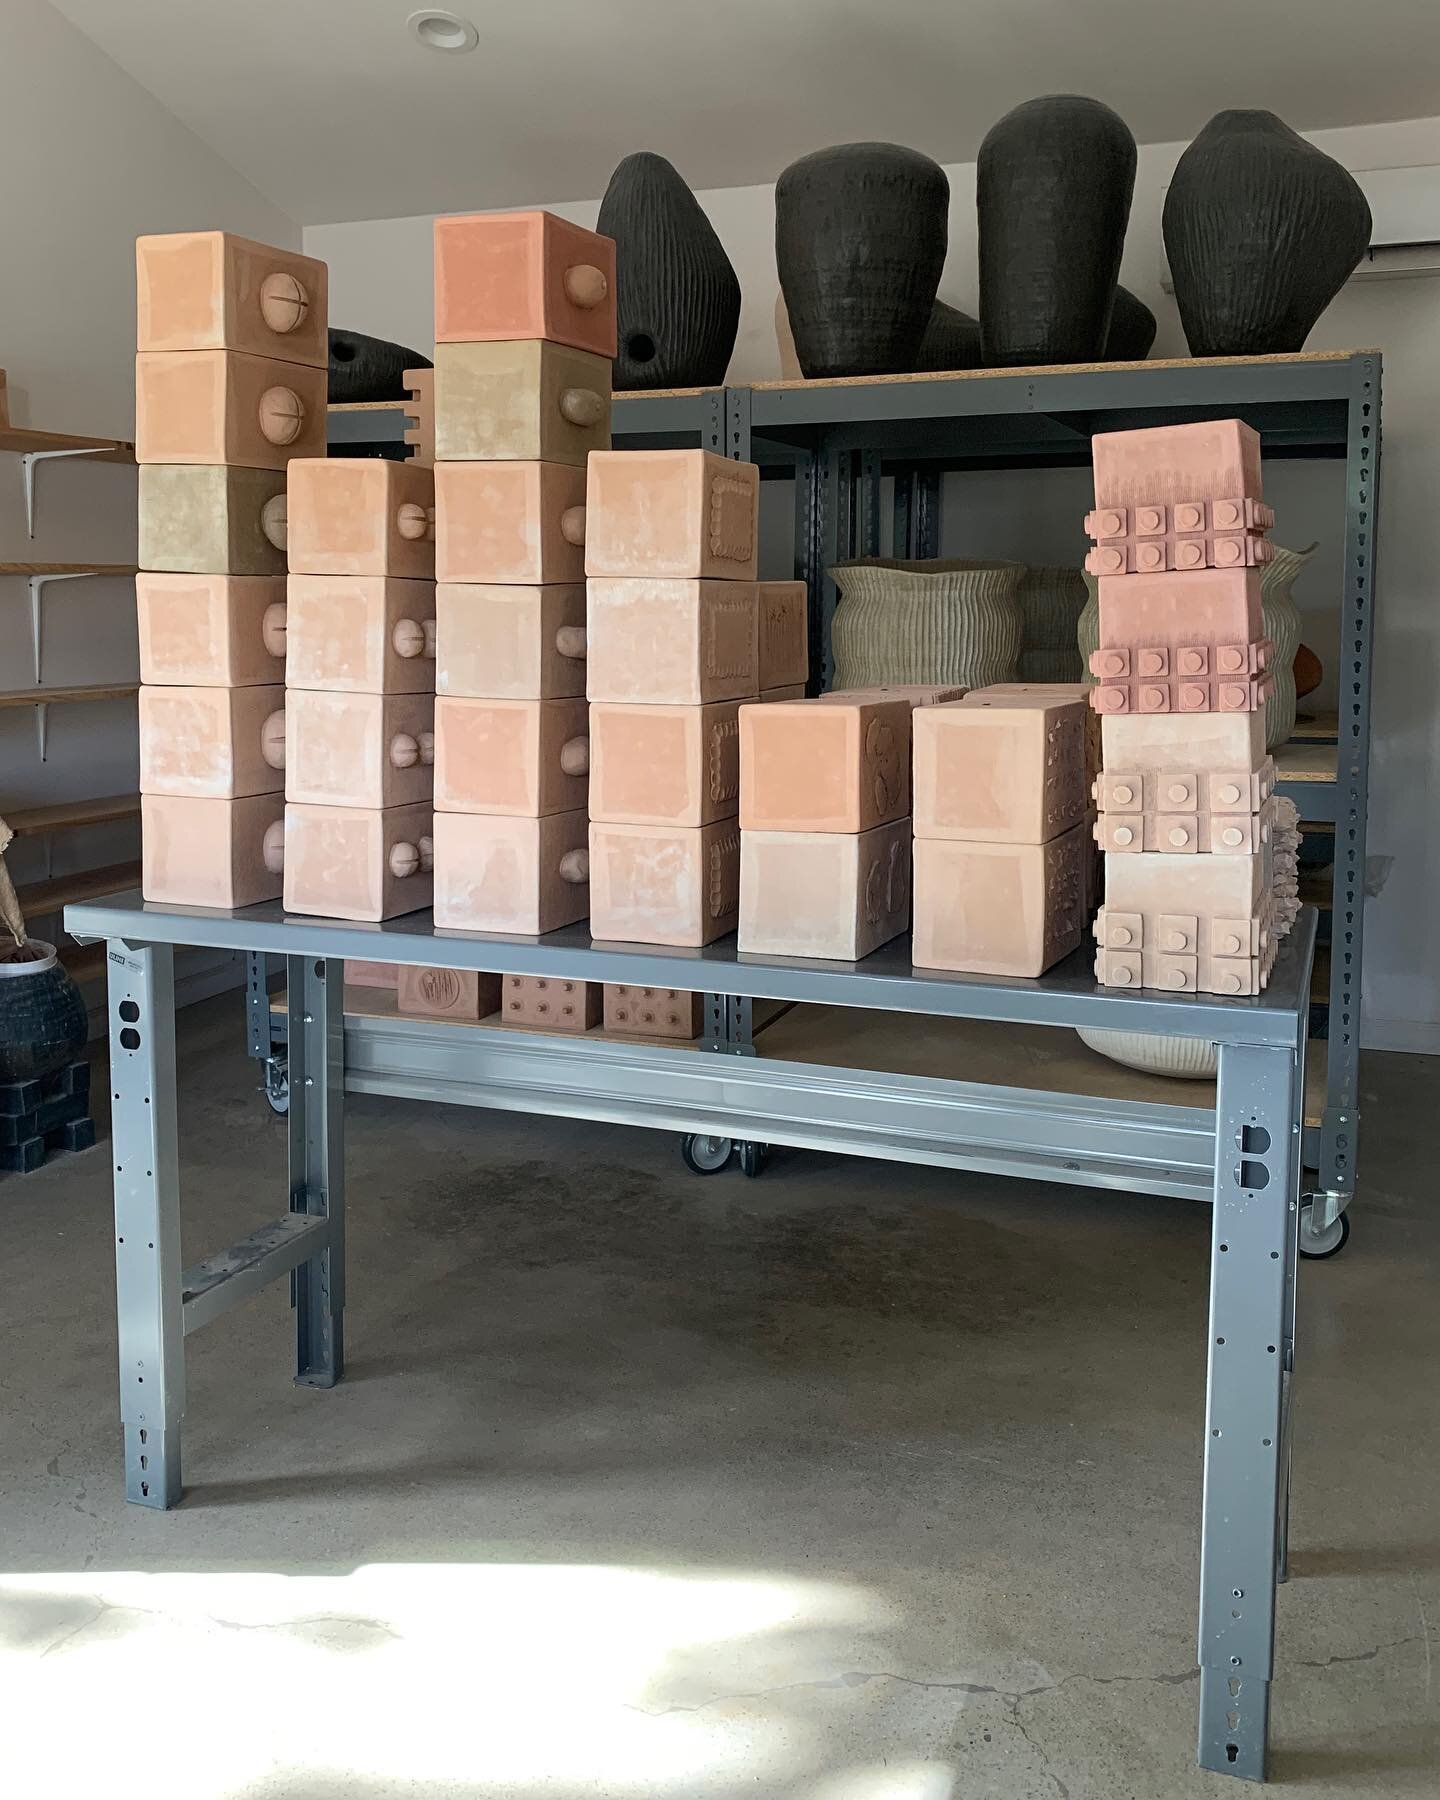 Tower city over here! 🏗️ Finalizing the composition of 4 ceramic towers for the the Hummingbird Inn @sheltersocialclub and getting ready to glaze! 

Each tower will have a hummingbird feeder built in🧃Hoping to have these installed for the mini bird